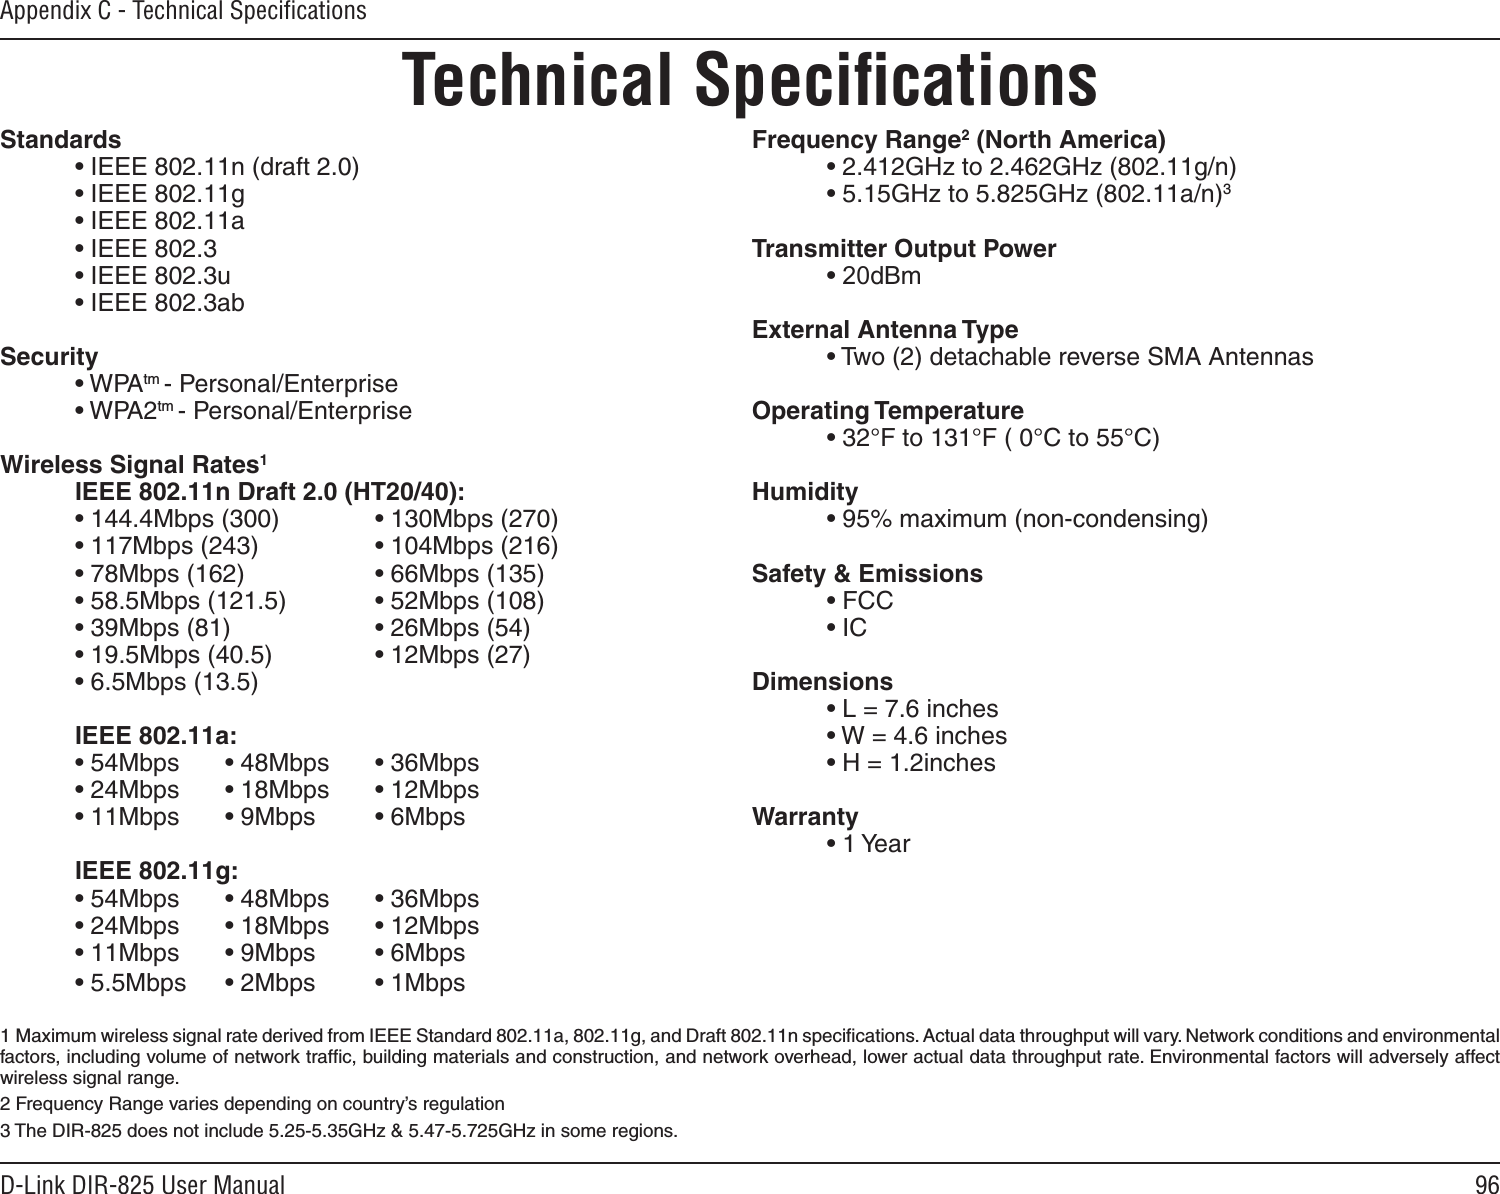 96D-Link DIR-825 User ManualAppendix C - Technical SpeciﬁcationsTechnical SpeciﬁcationsStandards  • IEEE 802.11n (draft 2.0)  • IEEE 802.11g  • IEEE 802.11a  • IEEE 802.3  • IEEE 802.3u  • IEEE 802.3abSecurity  • WPAtm - Personal/Enterprise  • WPA2tm - Personal/Enterprise Wireless Signal Rates1  IEEE 802.11n Draft 2.0 (HT20/40):  • 144.4Mbps (300)    • 130Mbps (270)  • 117Mbps (243)    • 104Mbps (216)  • 78Mbps (162)    • 66Mbps (135)  • 58.5Mbps (121.5)    • 52Mbps (108)  • 39Mbps (81)    • 26Mbps (54)  • 19.5Mbps (40.5)    • 12Mbps (27)  • 6.5Mbps (13.5)  IEEE 802.11a:  • 54Mbps  • 48Mbps  • 36Mbps  • 24Mbps  • 18Mbps  • 12Mbps  • 11Mbps  • 9Mbps  • 6Mbps  IEEE 802.11g:  • 54Mbps  • 48Mbps  • 36Mbps  • 24Mbps  • 18Mbps  • 12Mbps  • 11Mbps  • 9Mbps  • 6Mbps  • 5.5Mbps  • 2Mbps  • 1MbpsFrequency Range2 (North America)  • 2.412GHz to 2.462GHz (802.11g/n)  • 5.15GHz to 5.825GHz (802.11a/n)3Transmitter Output Power  • 20dBm ± 2dBExternal Antenna Type  • Two (2) detachable reverse SMA AntennasOperating Temperature  • 32°F to 131°F ( 0°C to 55°C)Humidity  • 95% maximum (non-condensing)Safety &amp; Emissions  • FCC    • ICDimensions  • L = 7.6 inches  • W = 4.6 inches  • H = 1.2inchesWarranty  • 1 Year1  Maximum wireless signal rate derived from IEEE Standard 802.11a, 802.11g, and Draft 802.11n speciﬁcations. Actual data throughput will vary. Network conditions and environmental factors, including volume of network trafﬁc, building materials and construction, and network overhead, lower actual data throughput rate. Environmental factors will adversely affect wireless signal range.2 Frequency Range varies depending on country’s regulation3 The DIR-825 does not include 5.25-5.35GHz &amp; 5.47-5.725GHz in some regions.